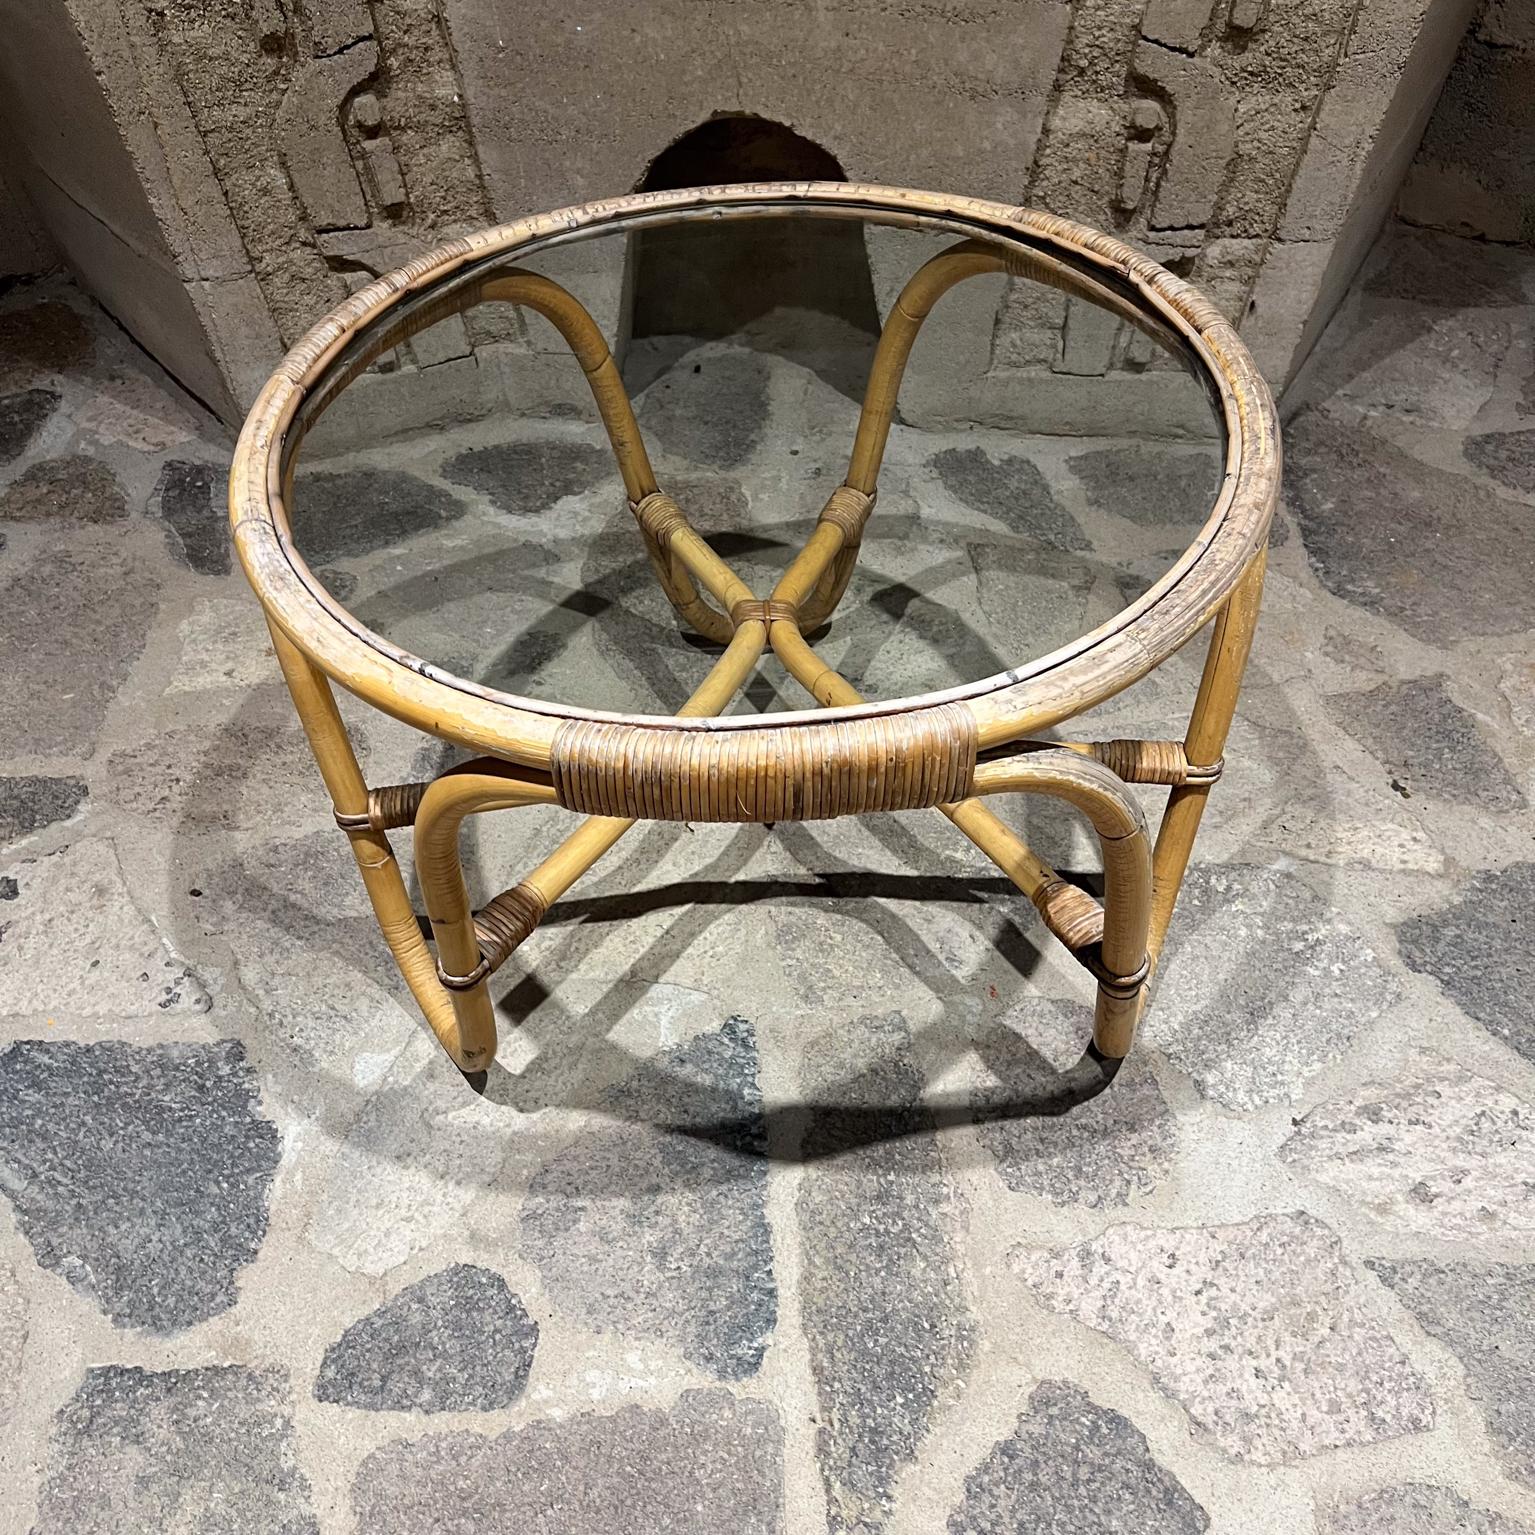 1936 Arne Jacobsen for Sika-Design Natural Rattan Charlottenborg Coffee Table In Good Condition For Sale In Chula Vista, CA